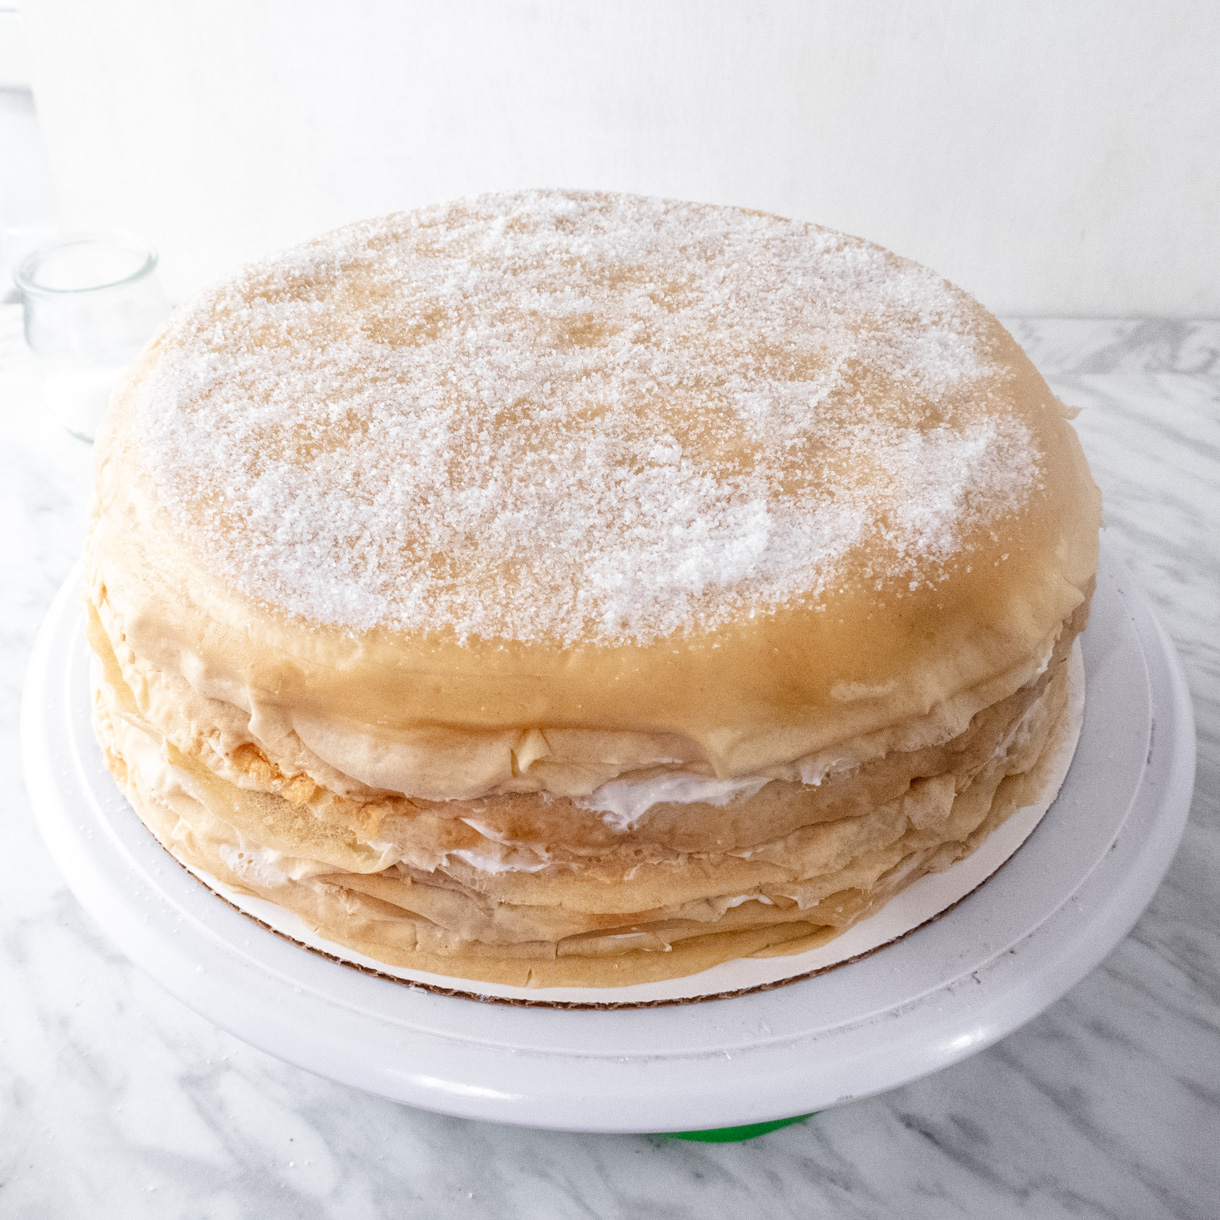 Vegan mille crepe cake with a thin layer of raw sugar on the top.